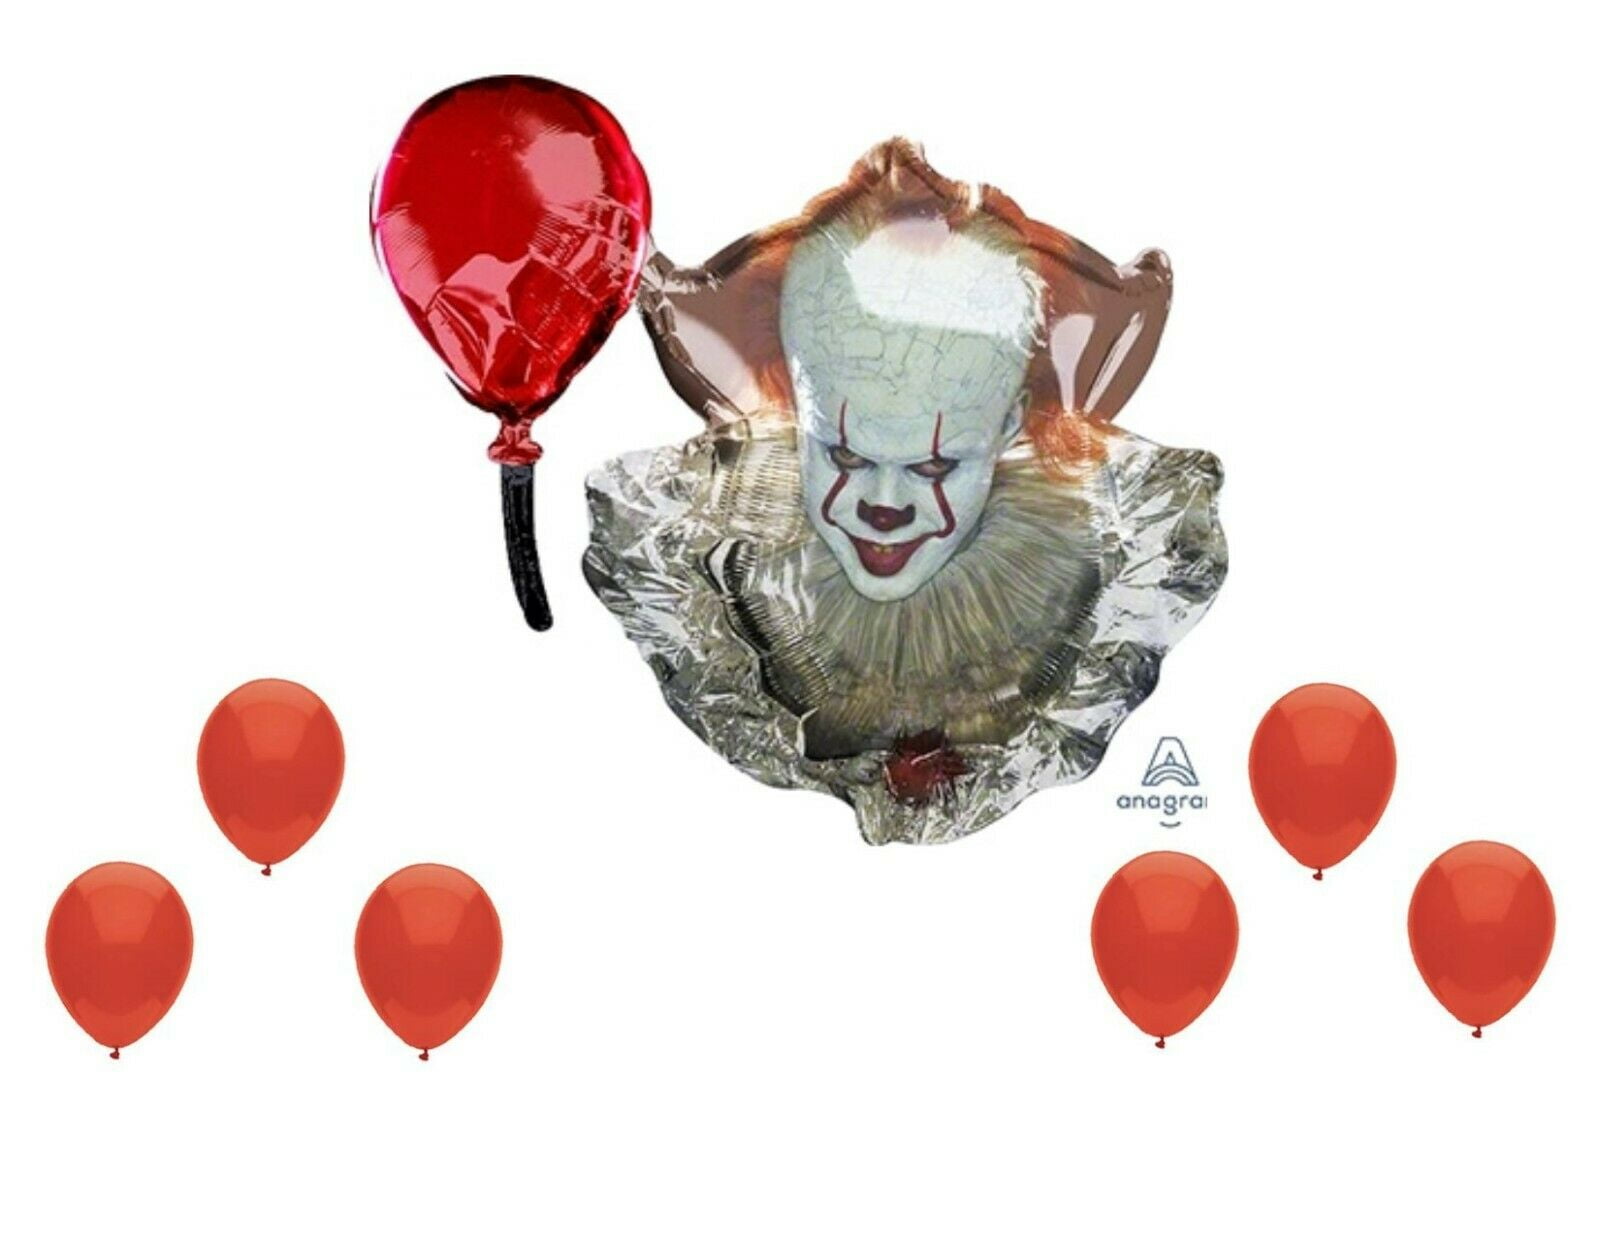 Pennywise It clown Christmas ornament tree decorations fast free ship 